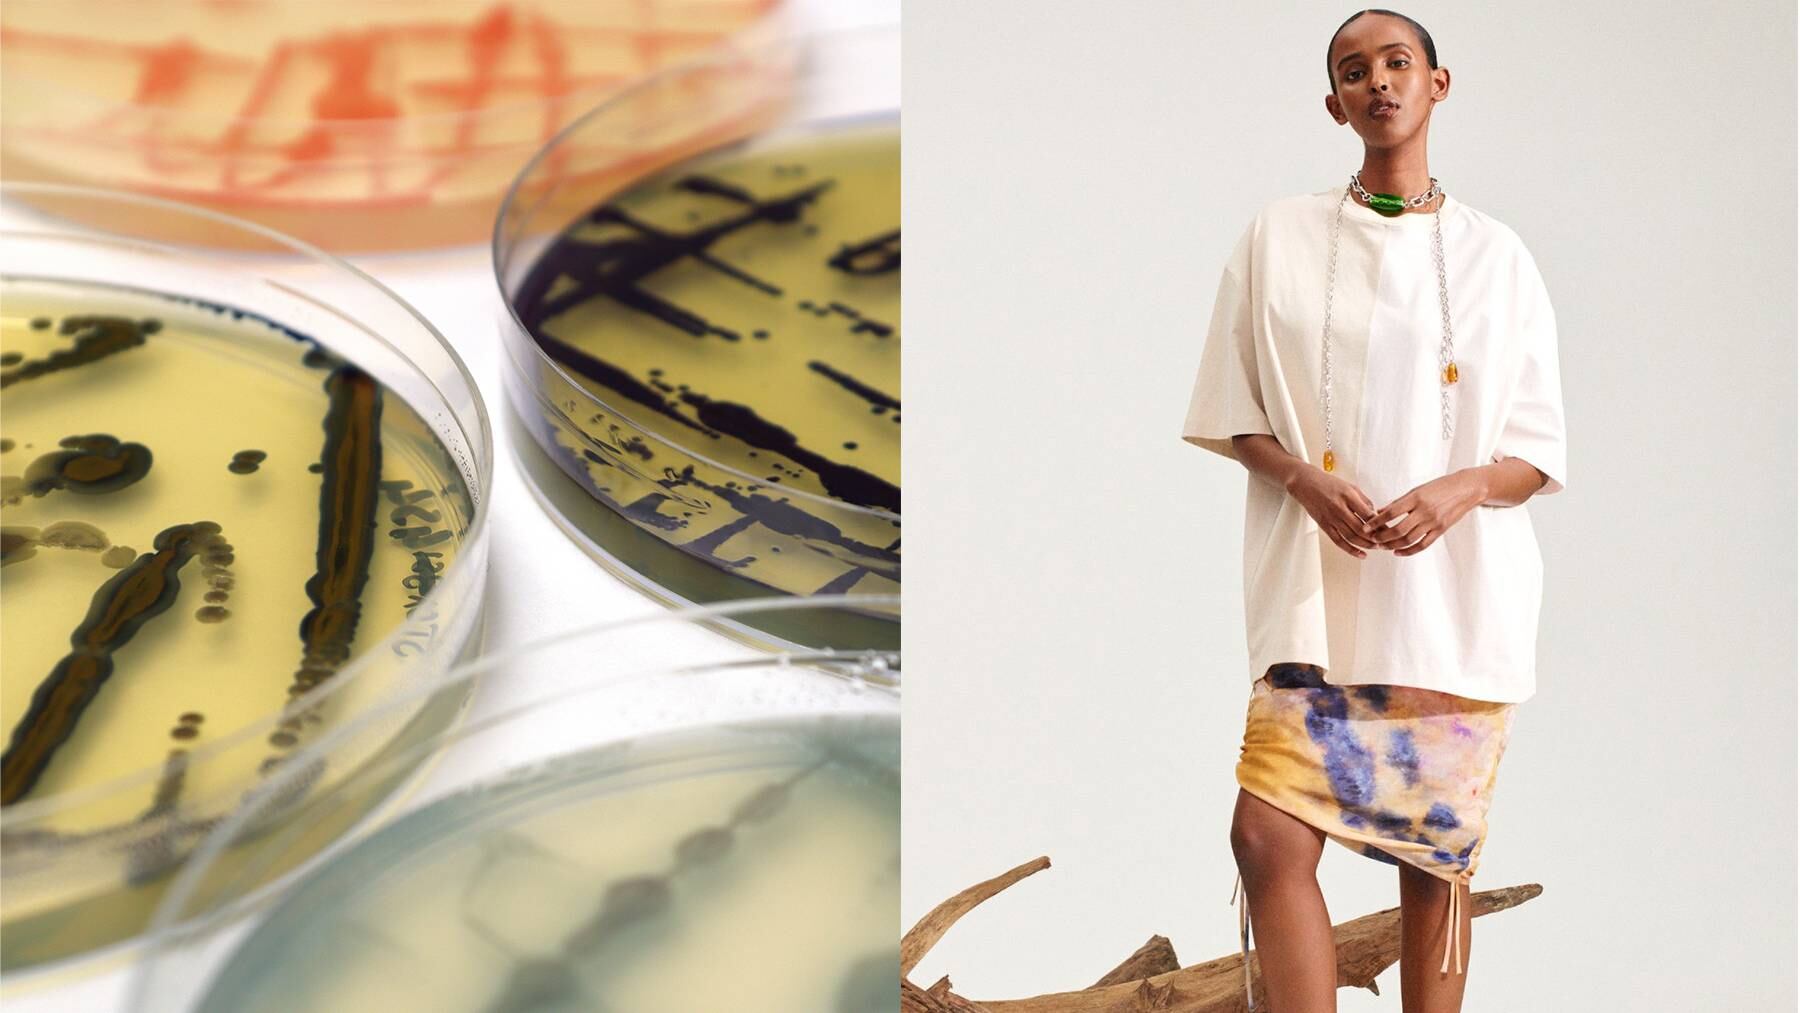 [Left-Right] Petri dishes from biotech start-up Colorifix; an H&M campaign featuring a T-shirt dyed with Colorifix technology.